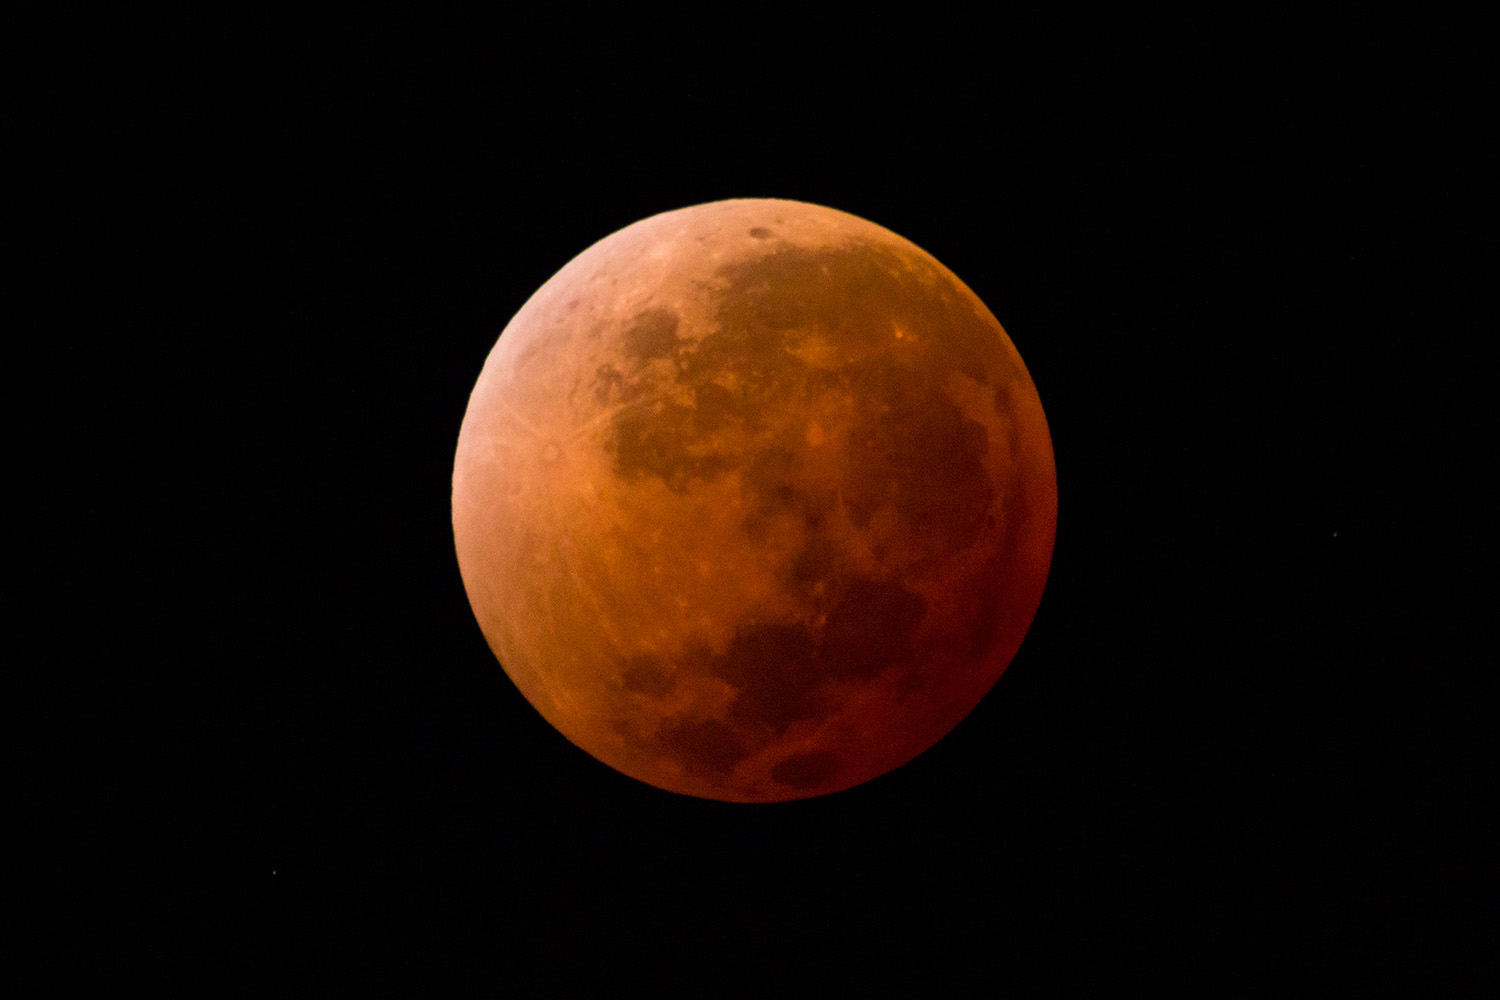 Australians will see the longest lunar eclipse of the century on